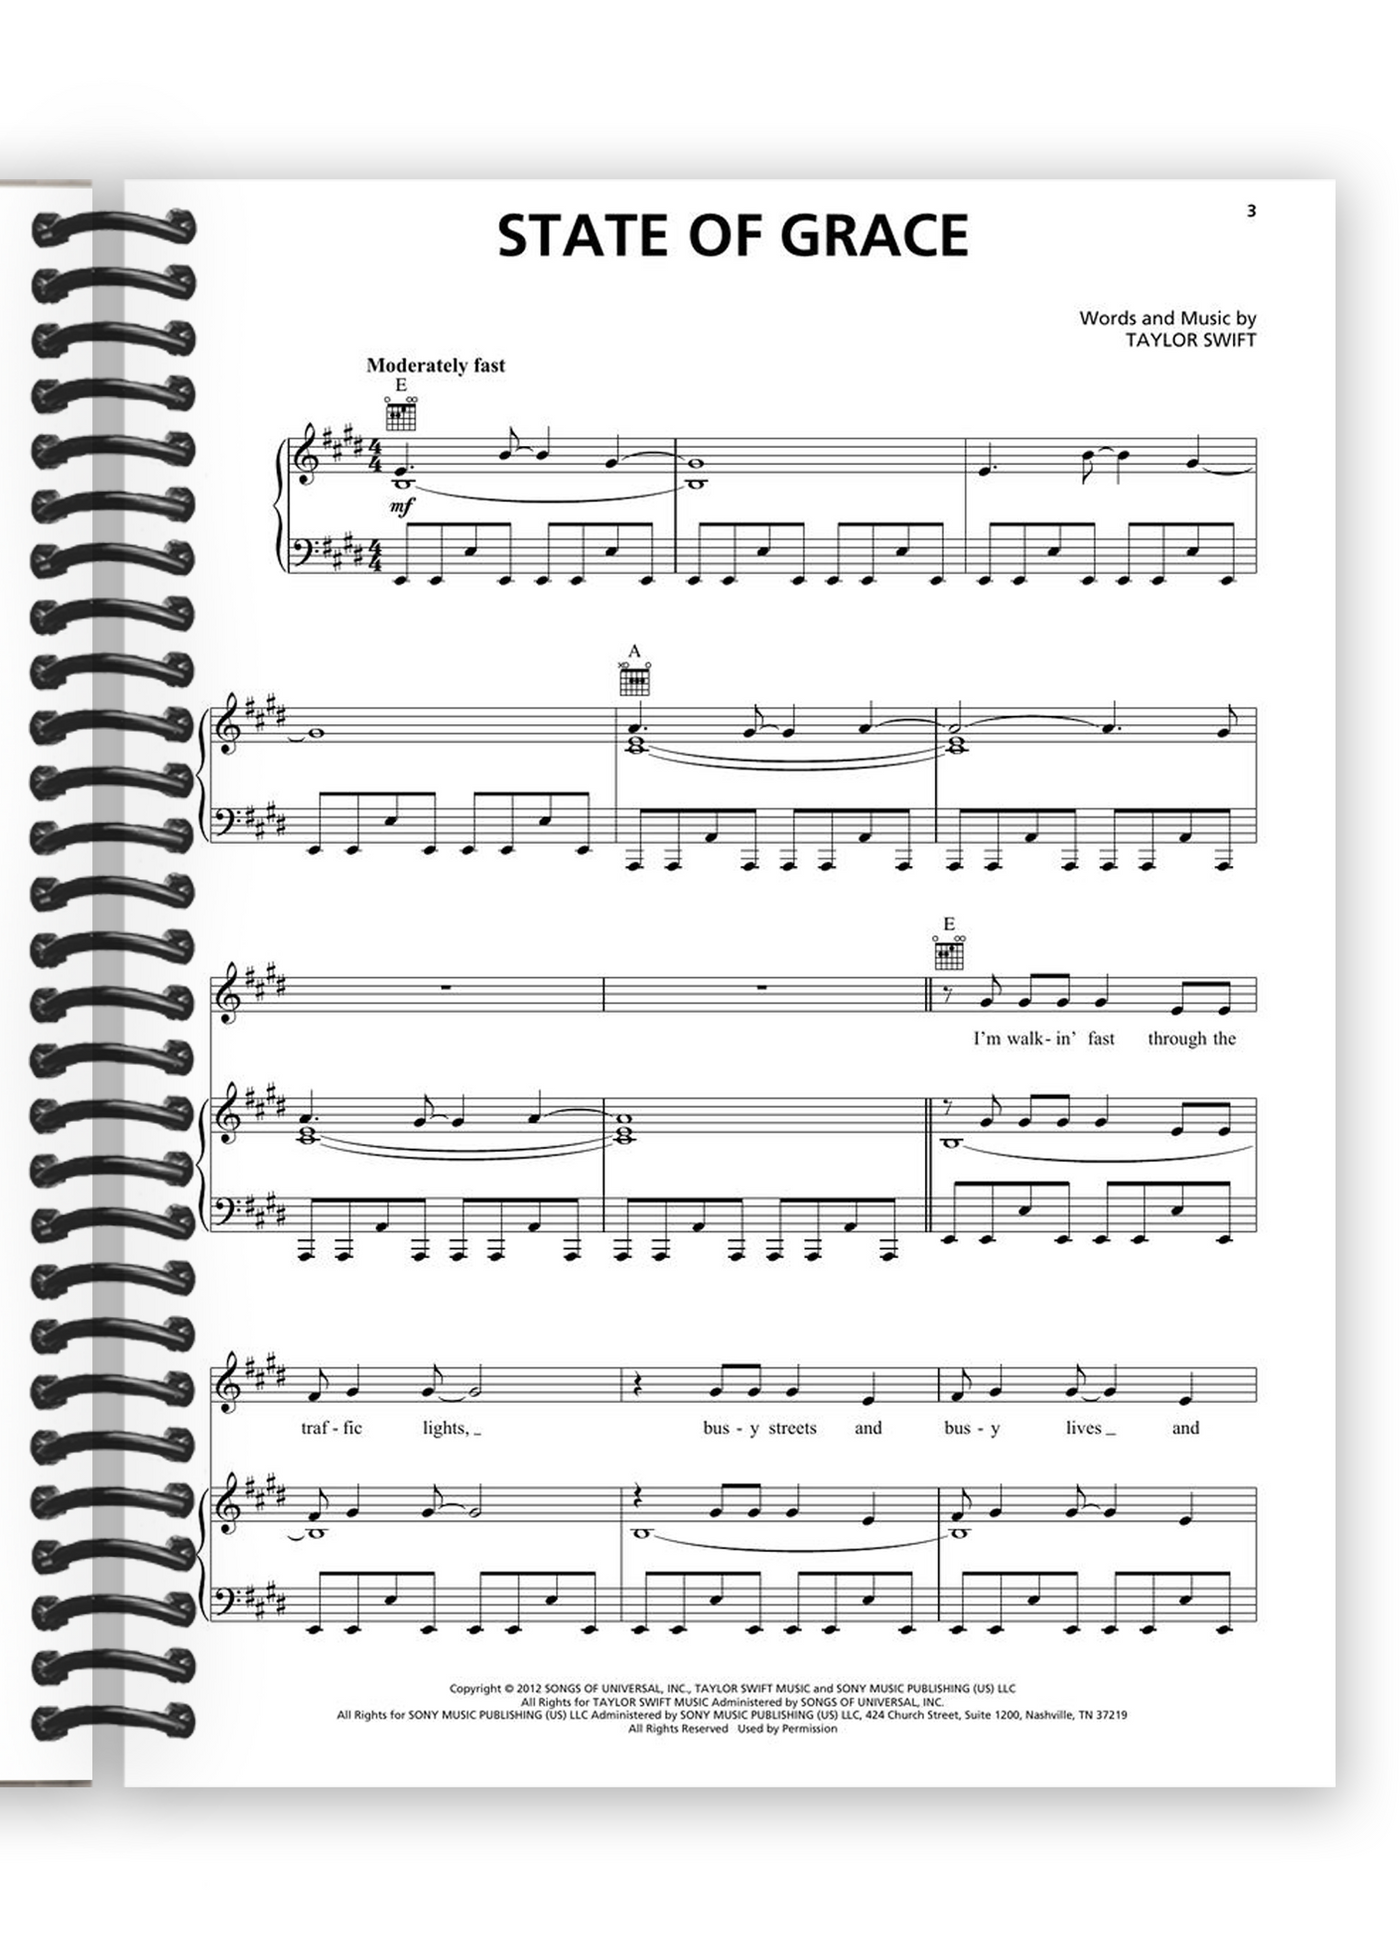 Taylor Swift - Red (Taylor's Version): Piano/Vocal/Guitar Songbook (Spiral Bound)